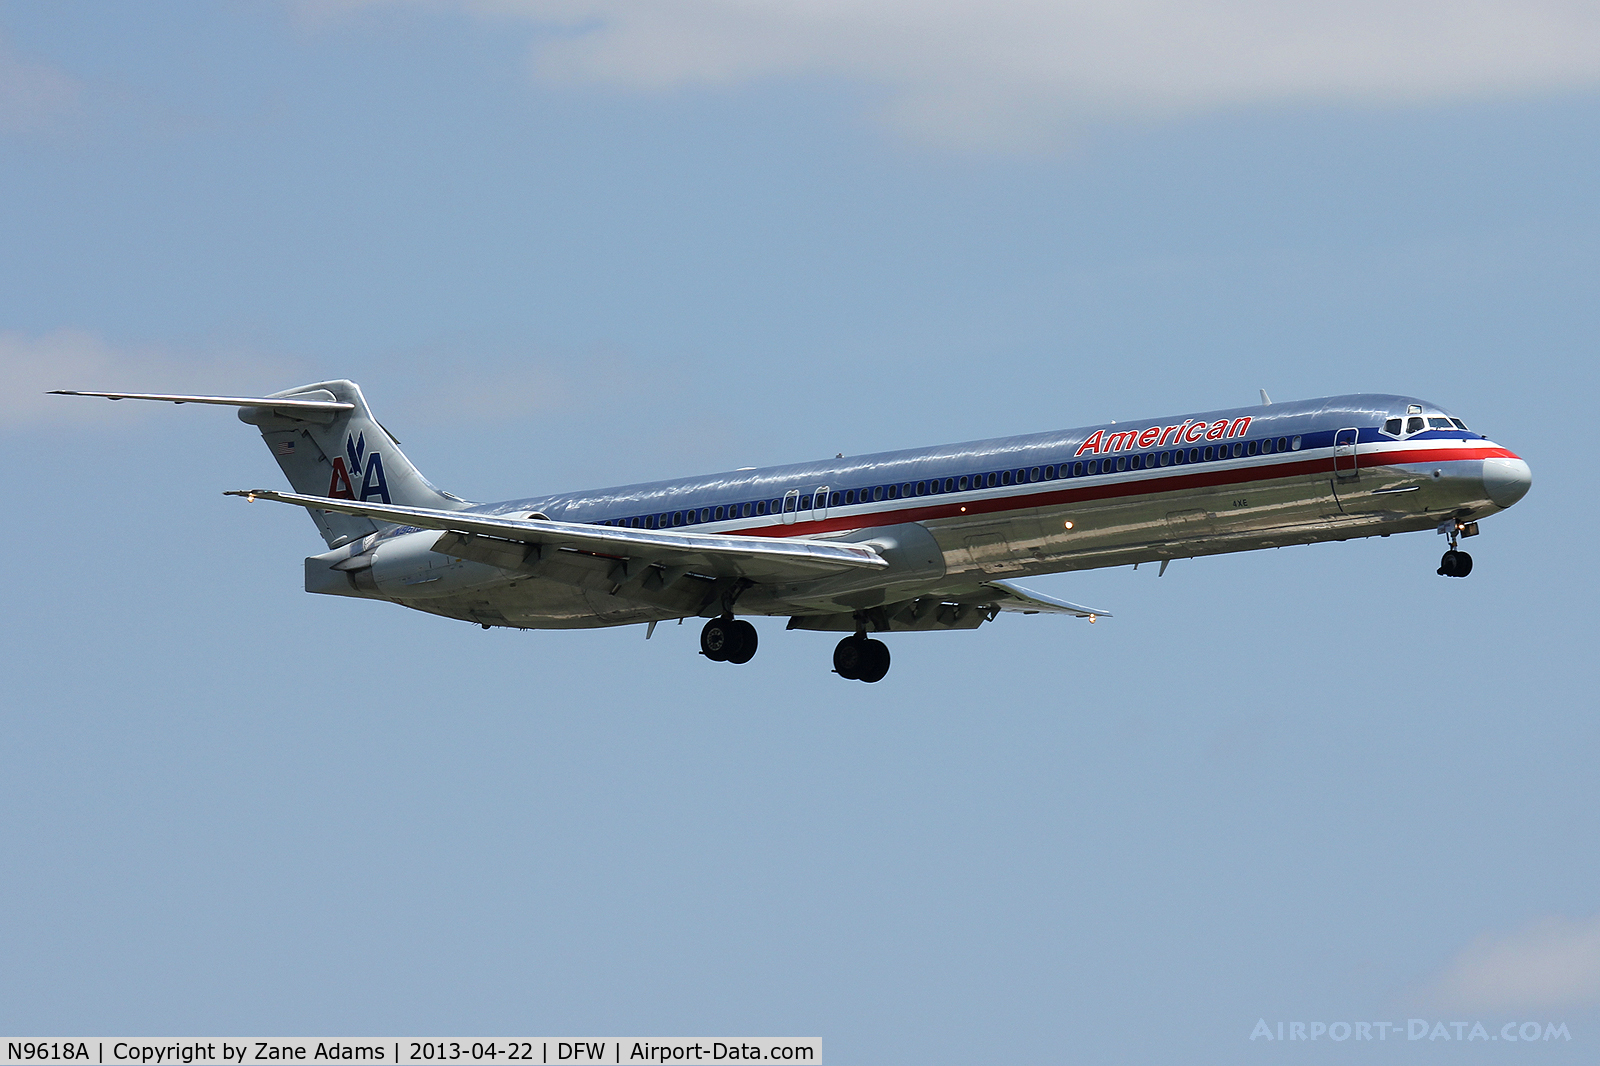 N9618A, 1997 McDonnell Douglas MD-83 (DC-9-83) C/N 53565, American Airlines at DFW Airport